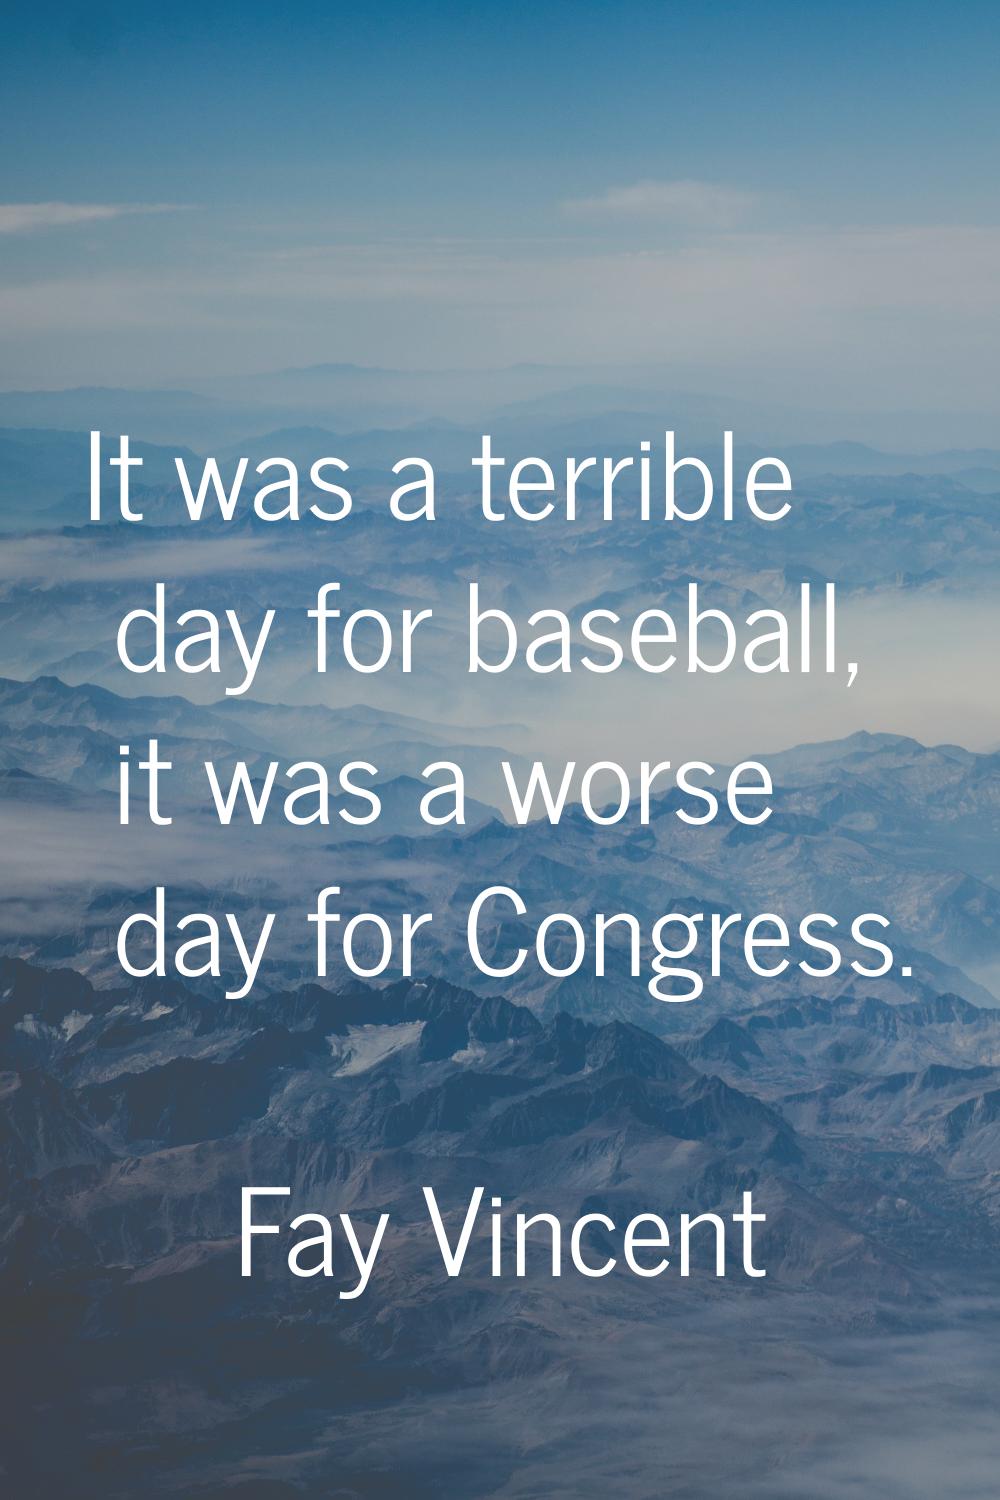 It was a terrible day for baseball, it was a worse day for Congress.